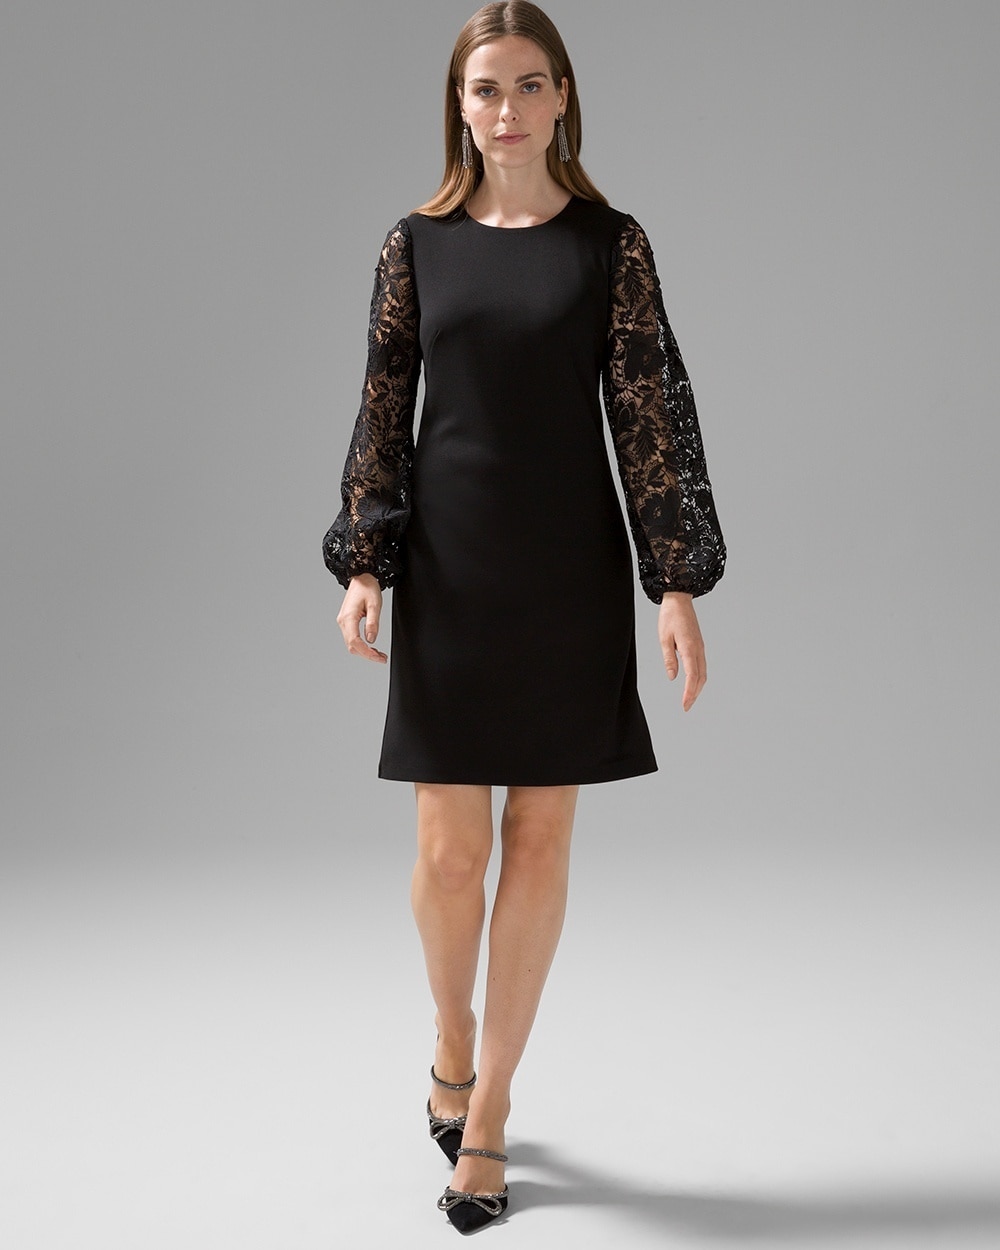 Lace Sleeve Shift Dress video preview image, click to start video